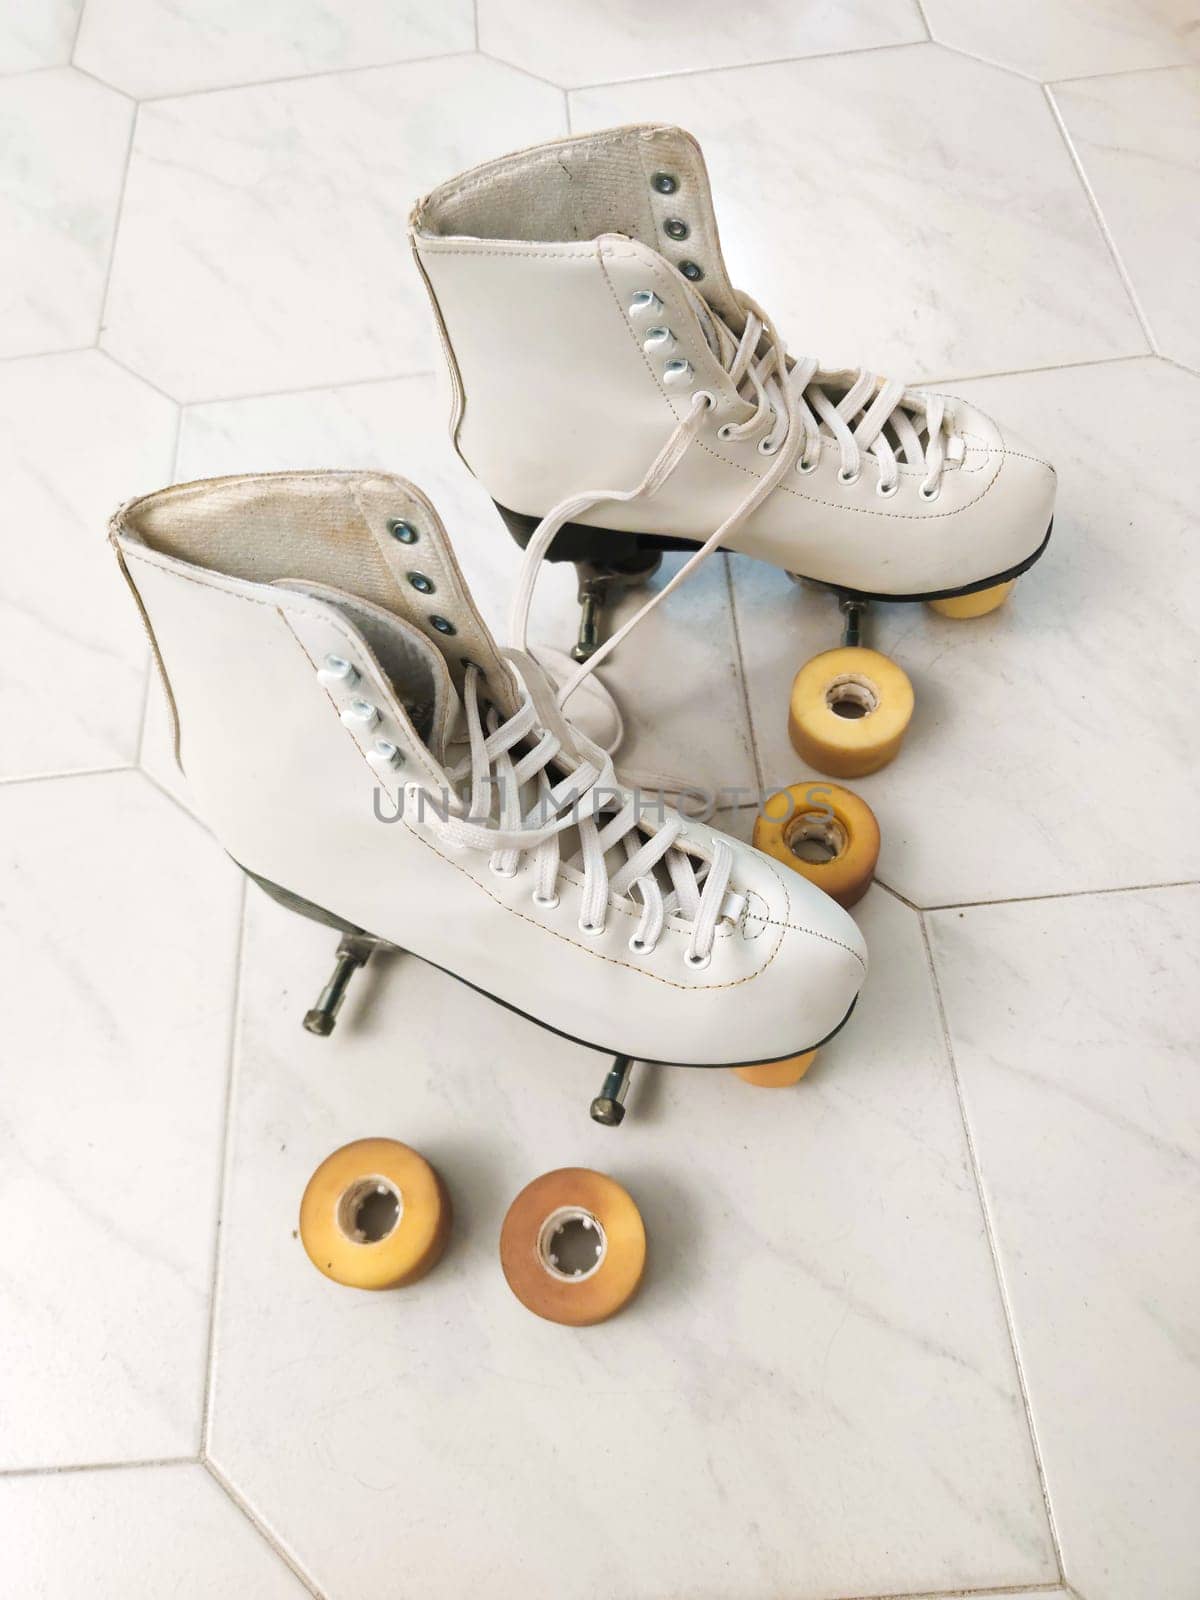 Professional roller skates with wheels that may be removed for cleaning and maintenance 
